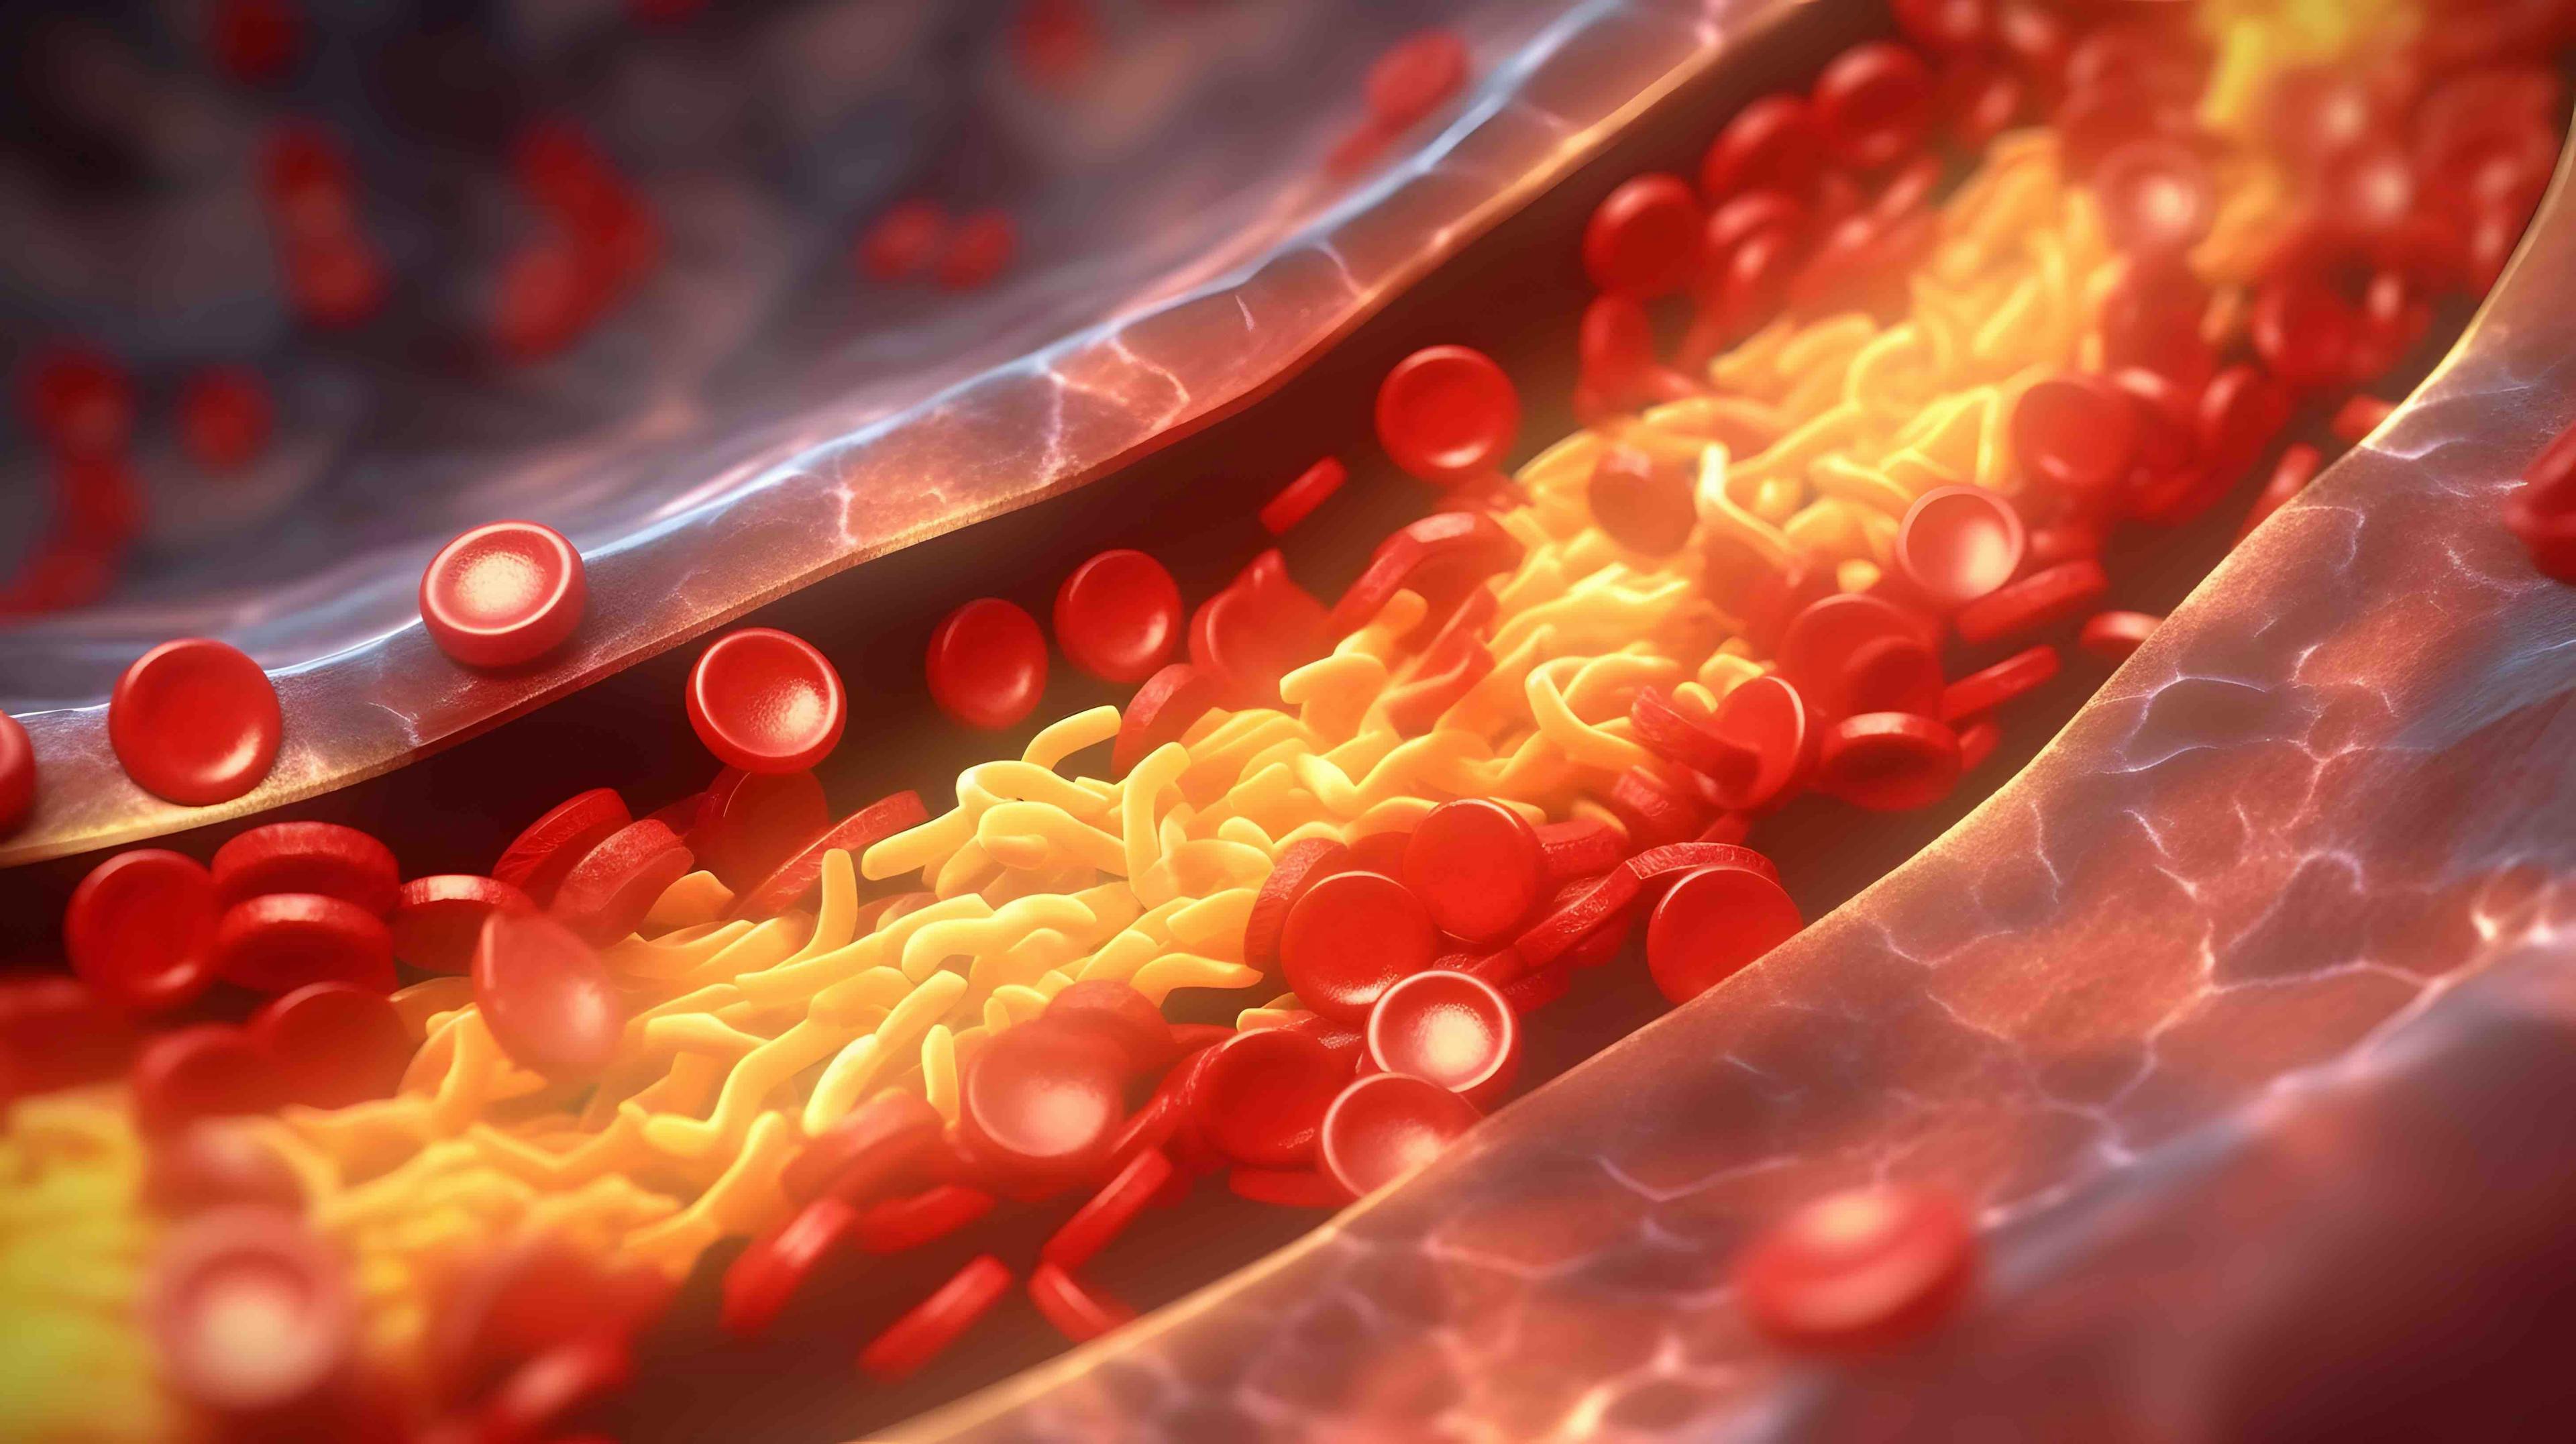 AI depiction of blood vessel with arterial plaque | Image credit: aapsky - stock.adobe.com